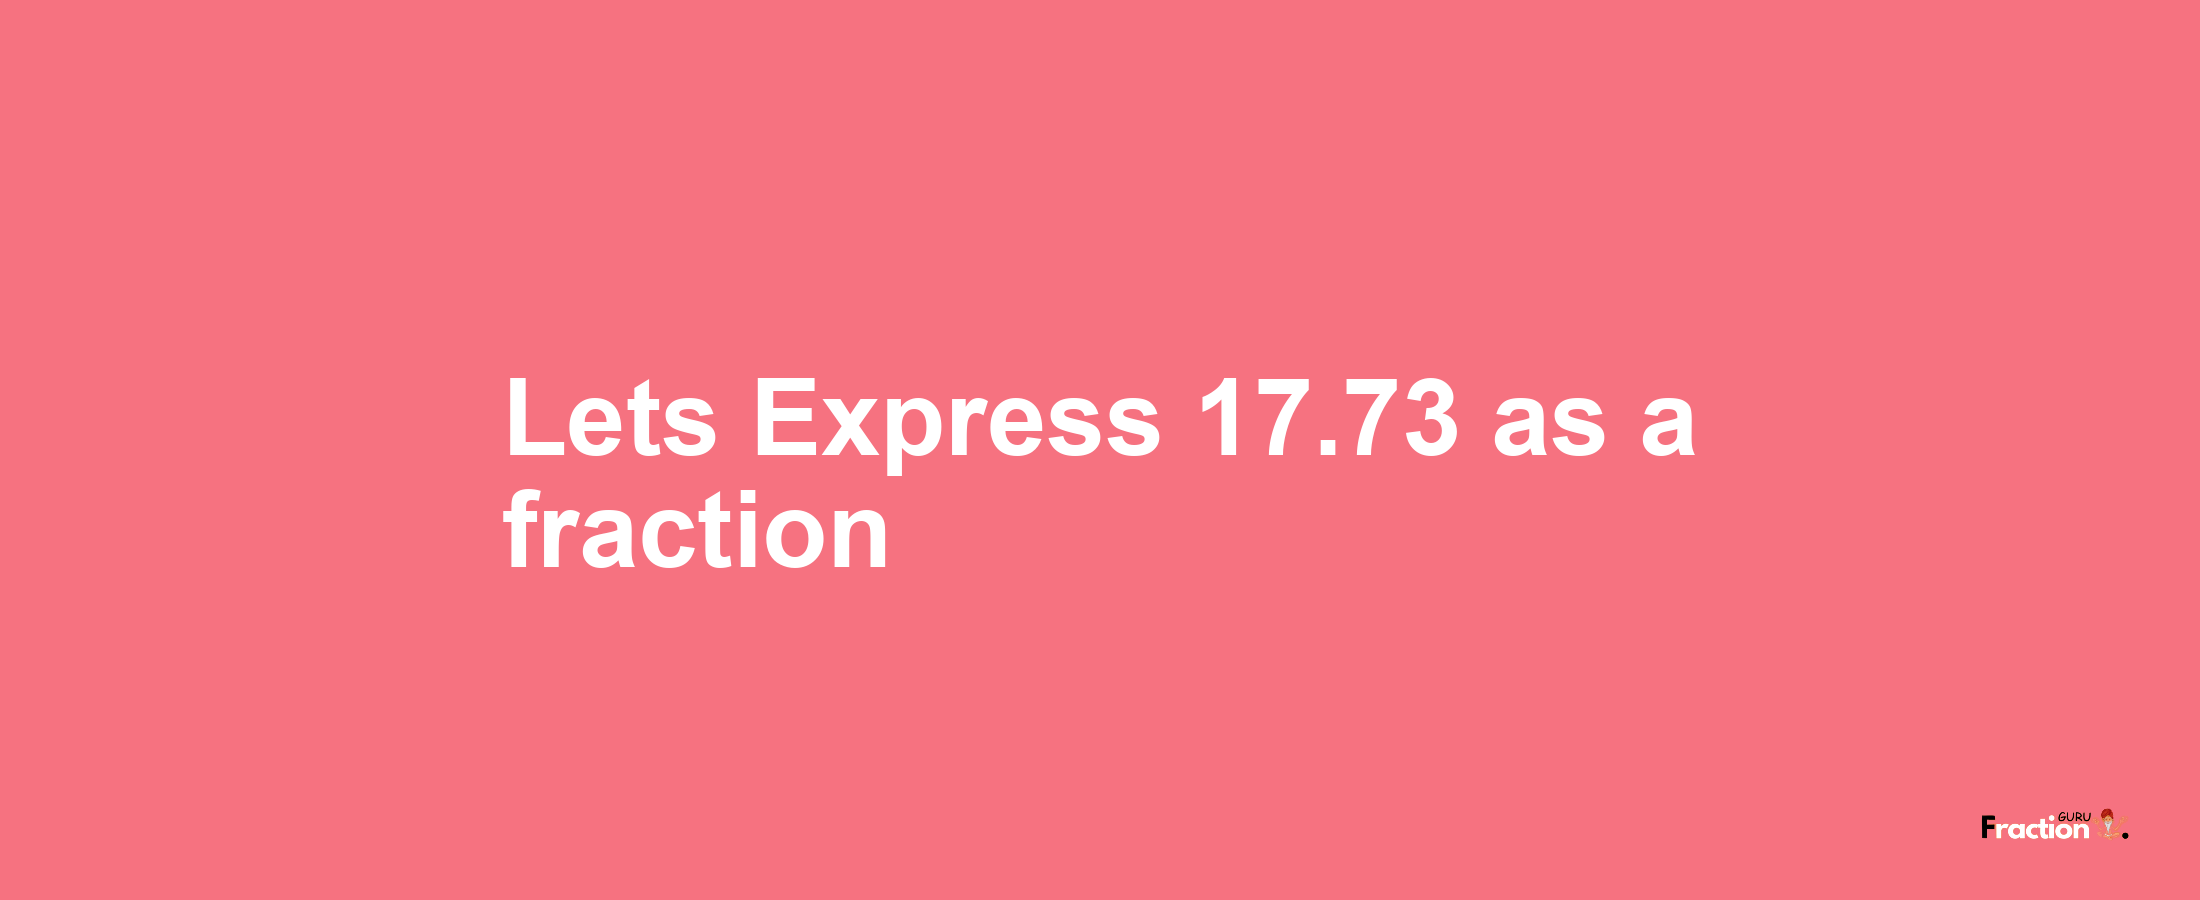 Lets Express 17.73 as afraction